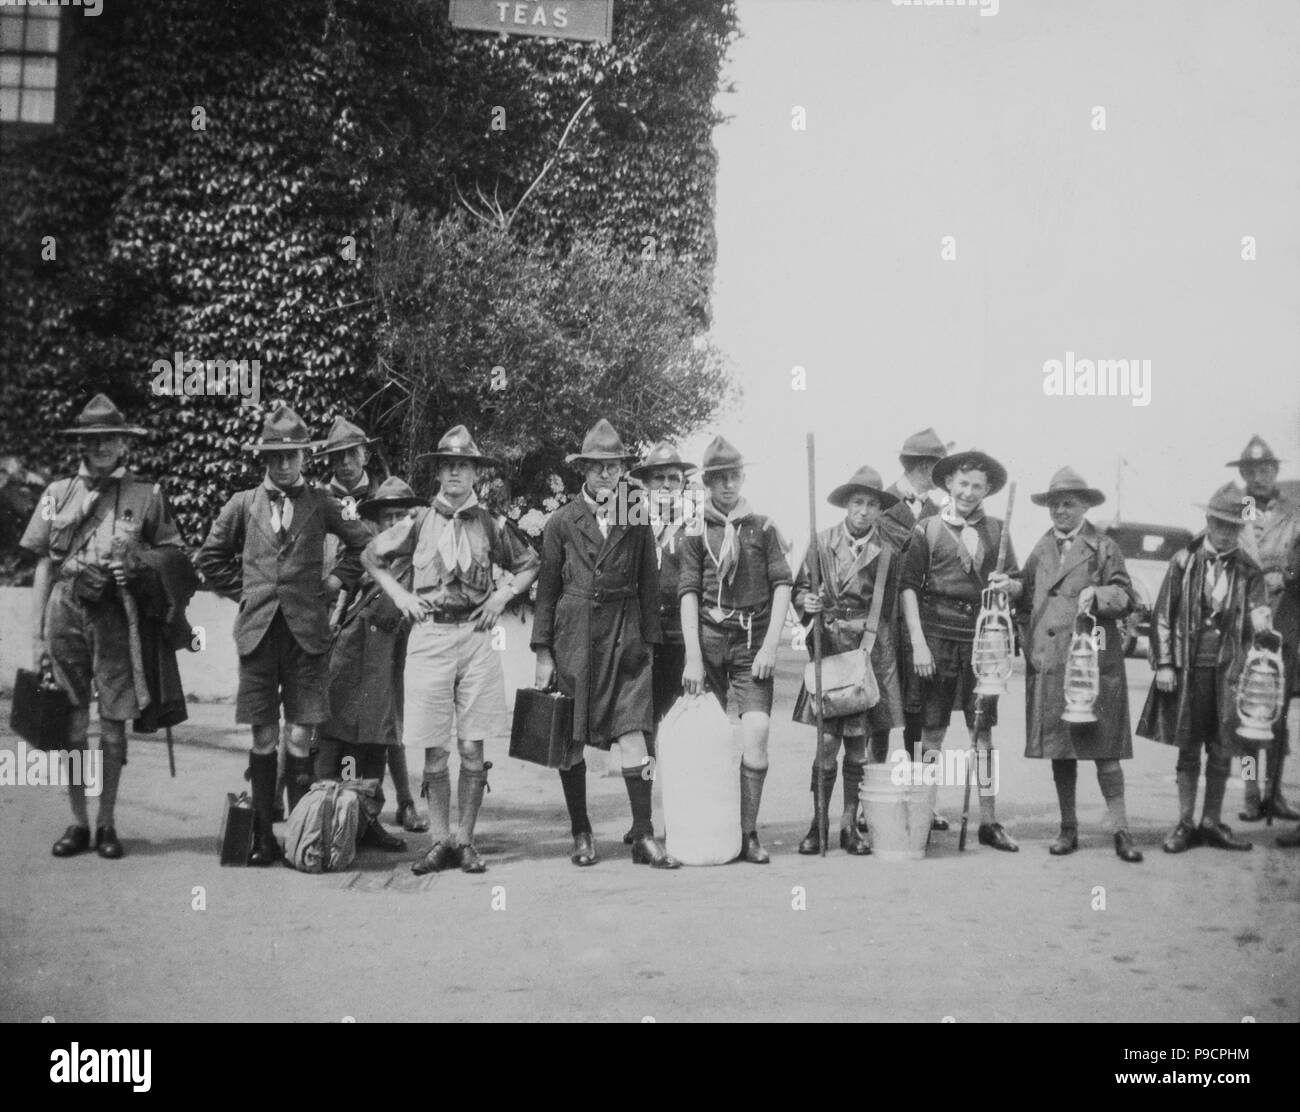 An early twentieth century photograph of a group of Scouts, somewhere in England. Stock Photo